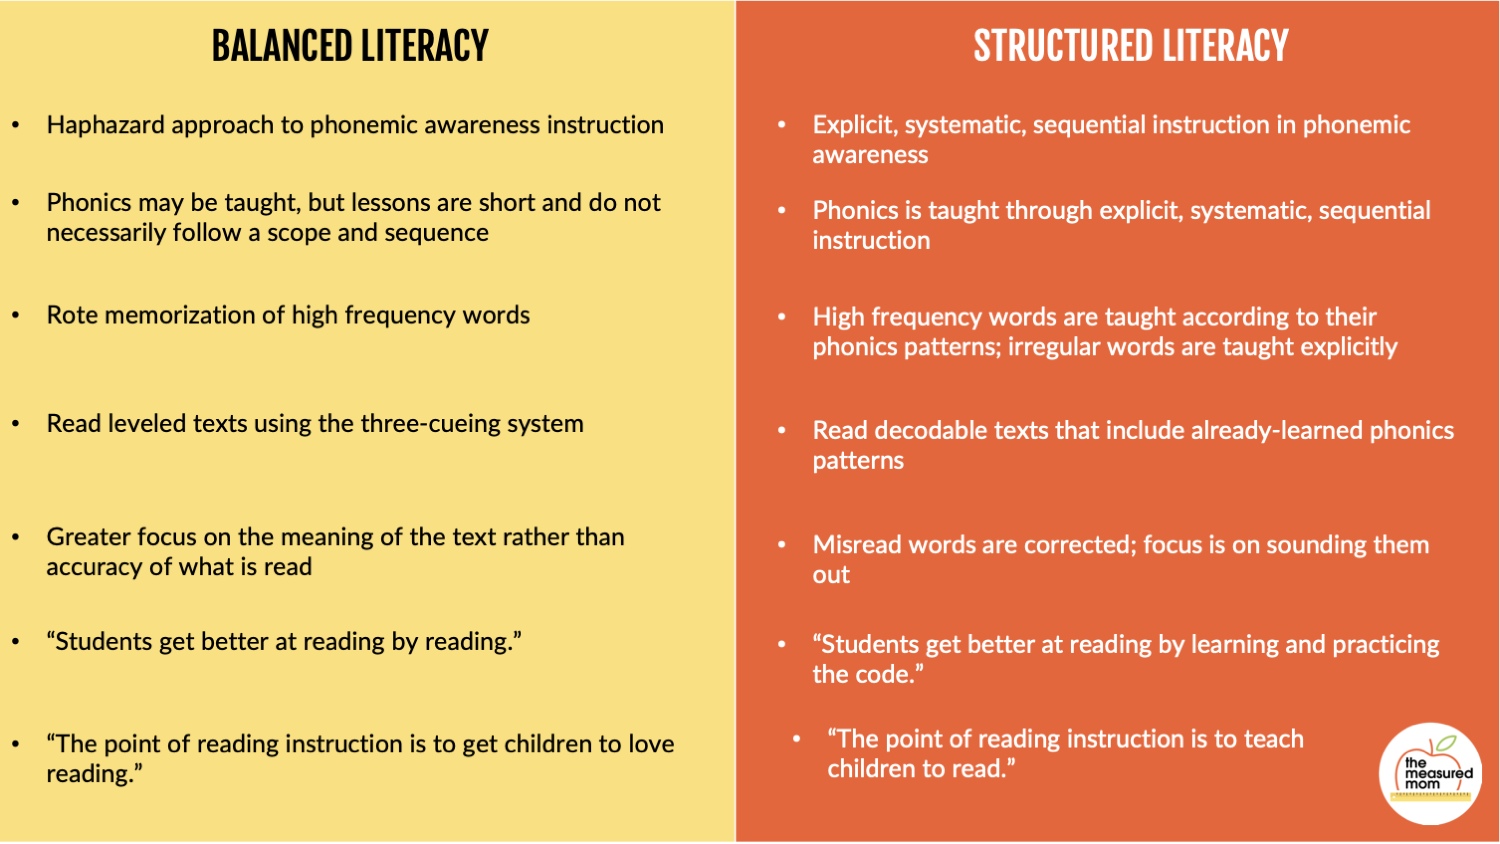 What is the difference between balanced and structured literacy?